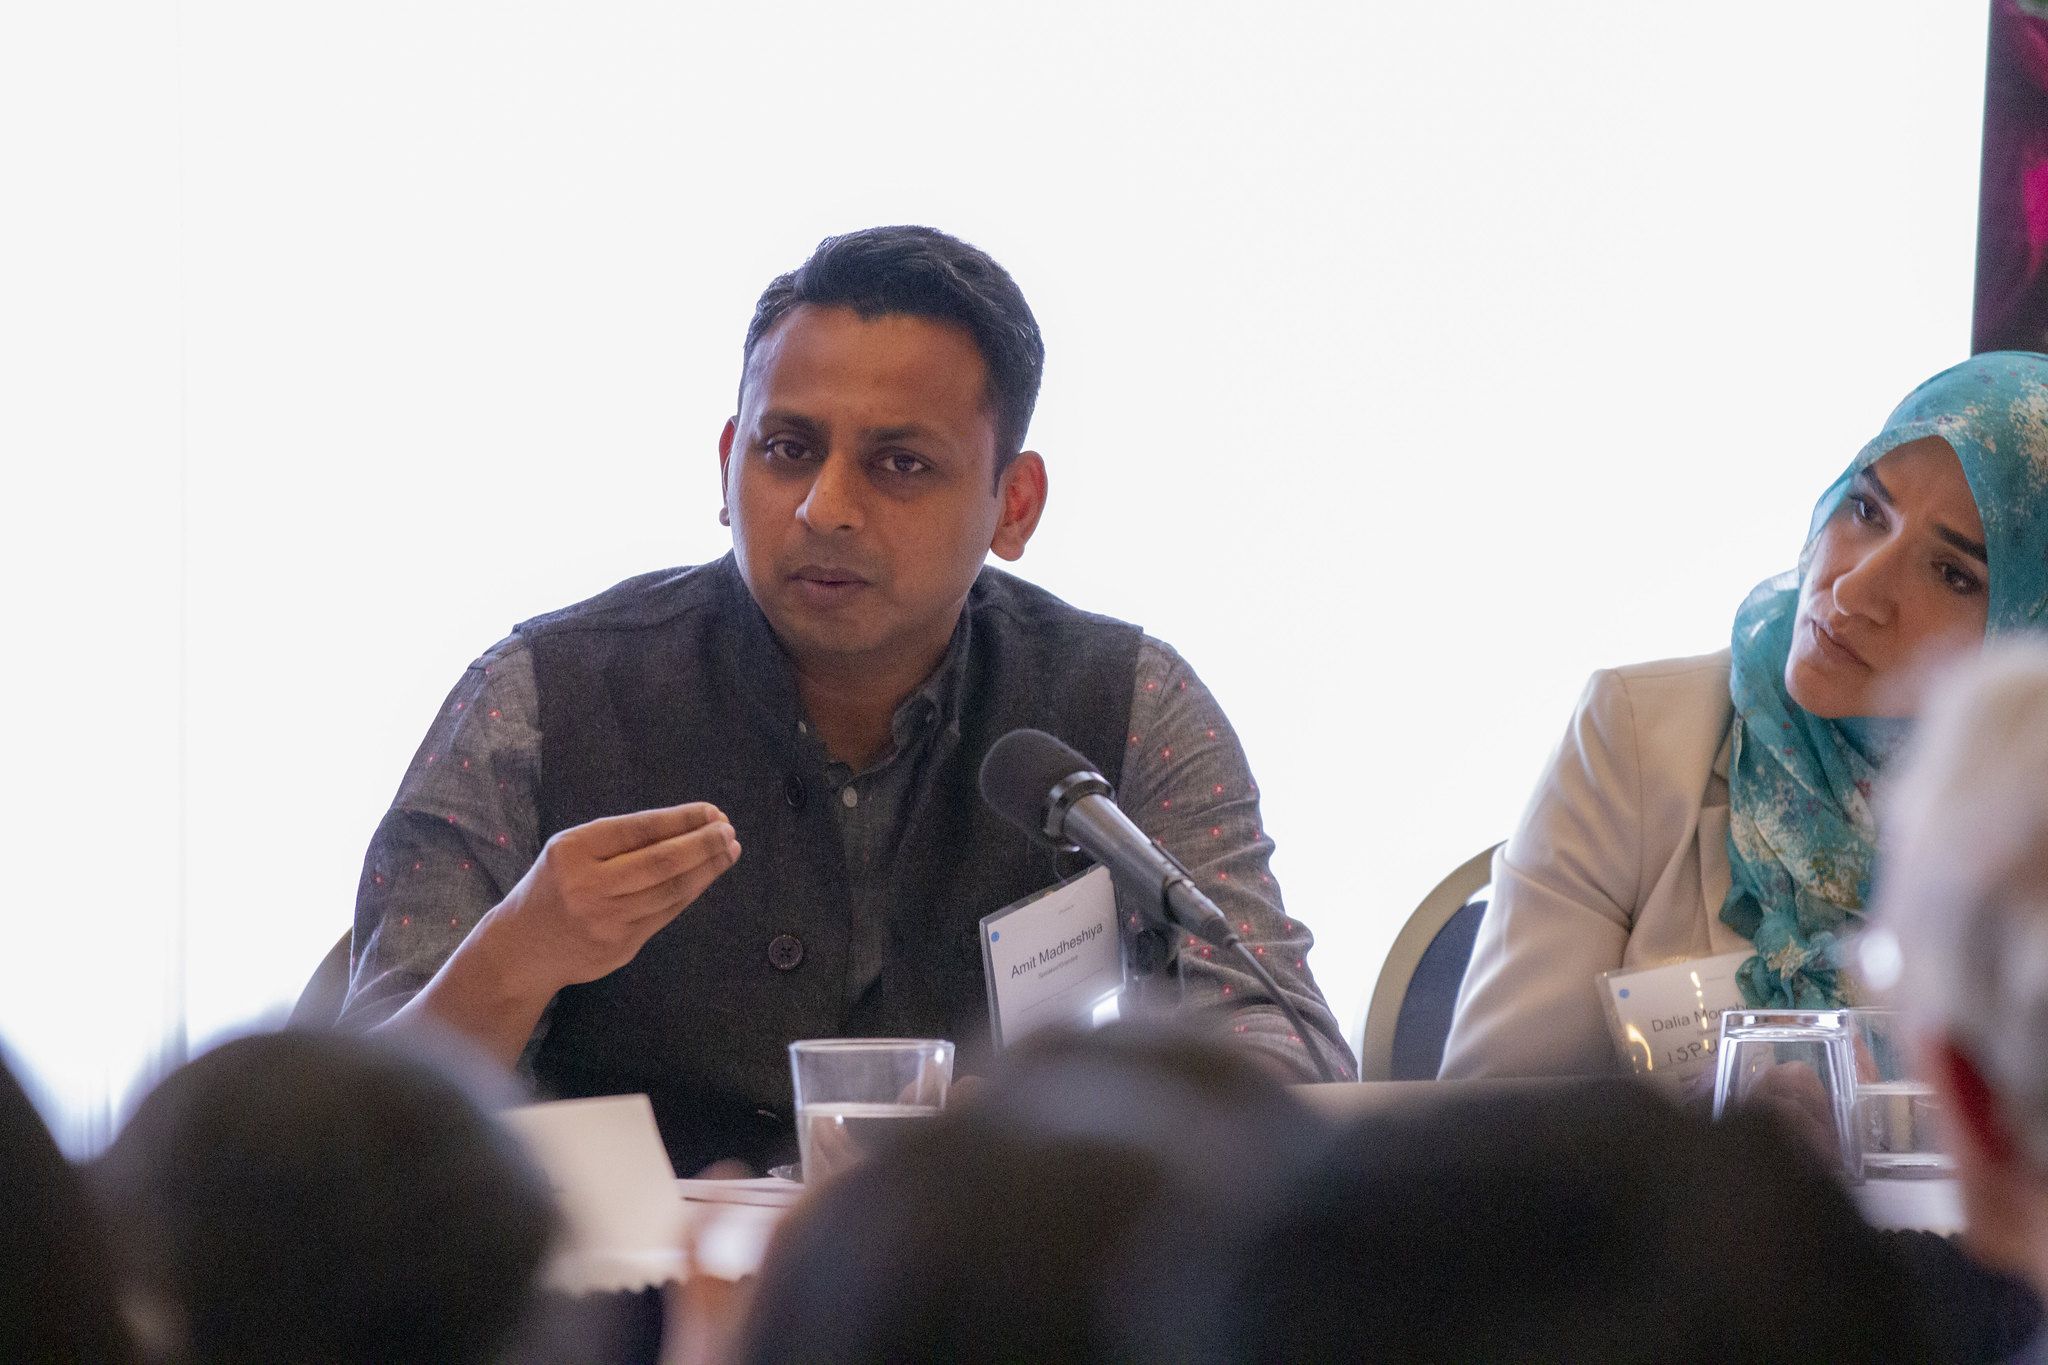 Filmmaker Amit Madheshiya explains the subject of his film, “The Hour of Lynching,” at the “Beyond Religion” conference. Image by Jin Ding. Washington, D.C., 2019.
